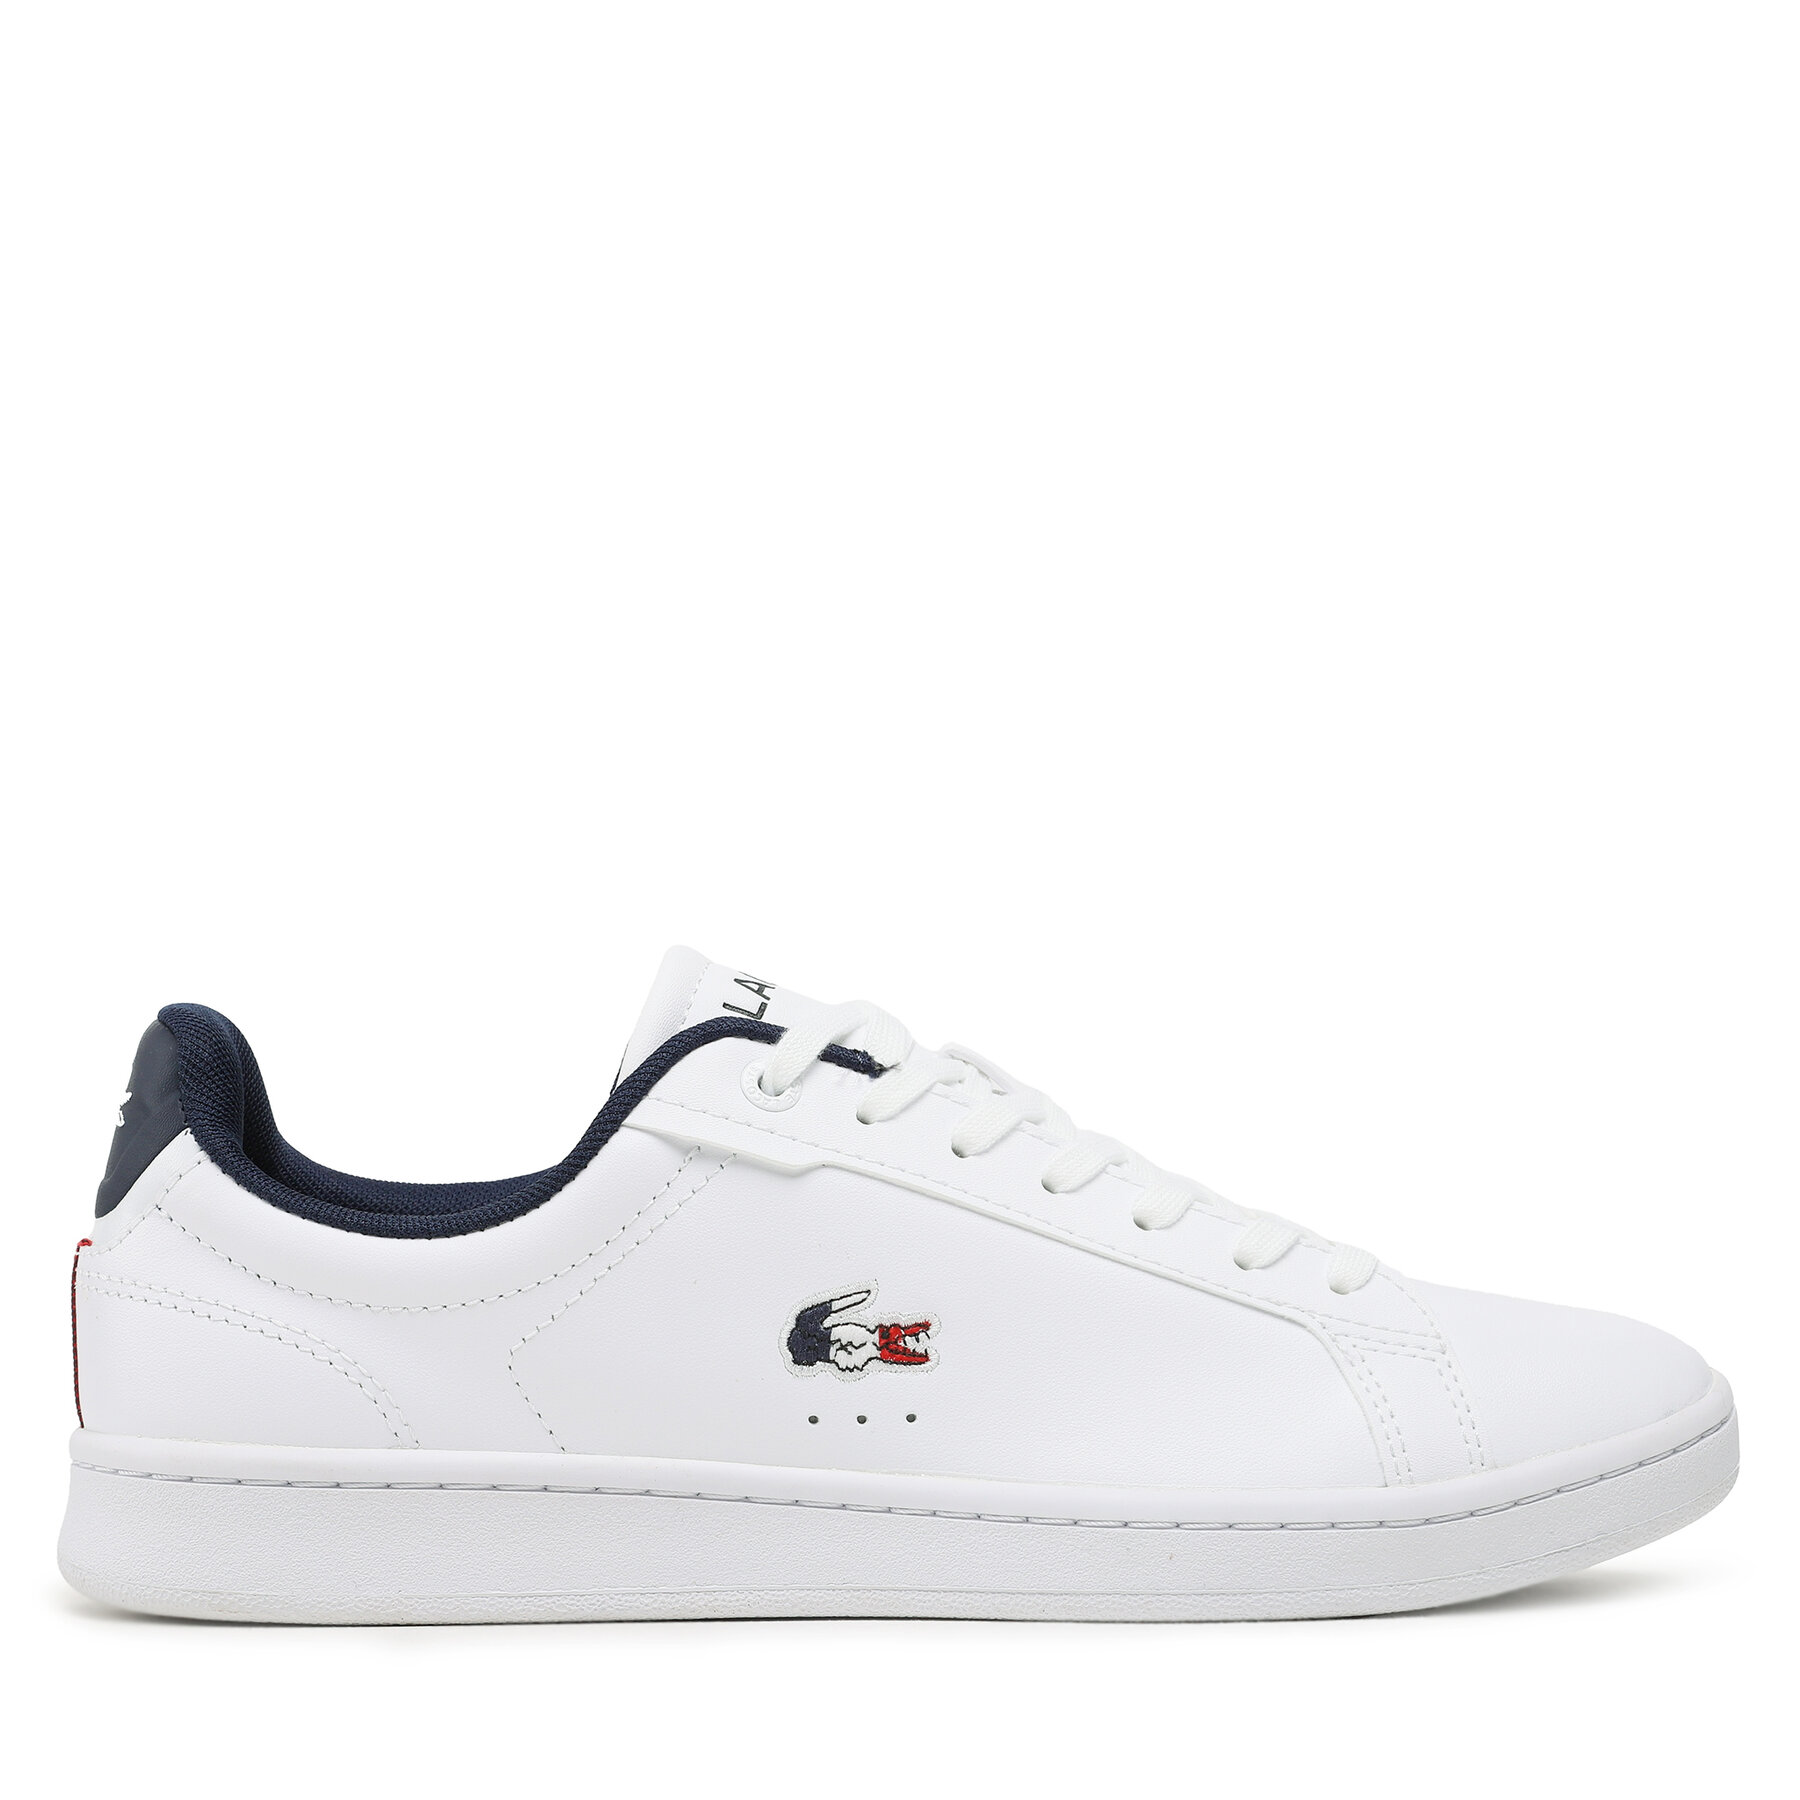 Superge Lacoste Carnaby Pro Tri 123 1 Sma 745SMA0114407 Wht/Nvy/Re